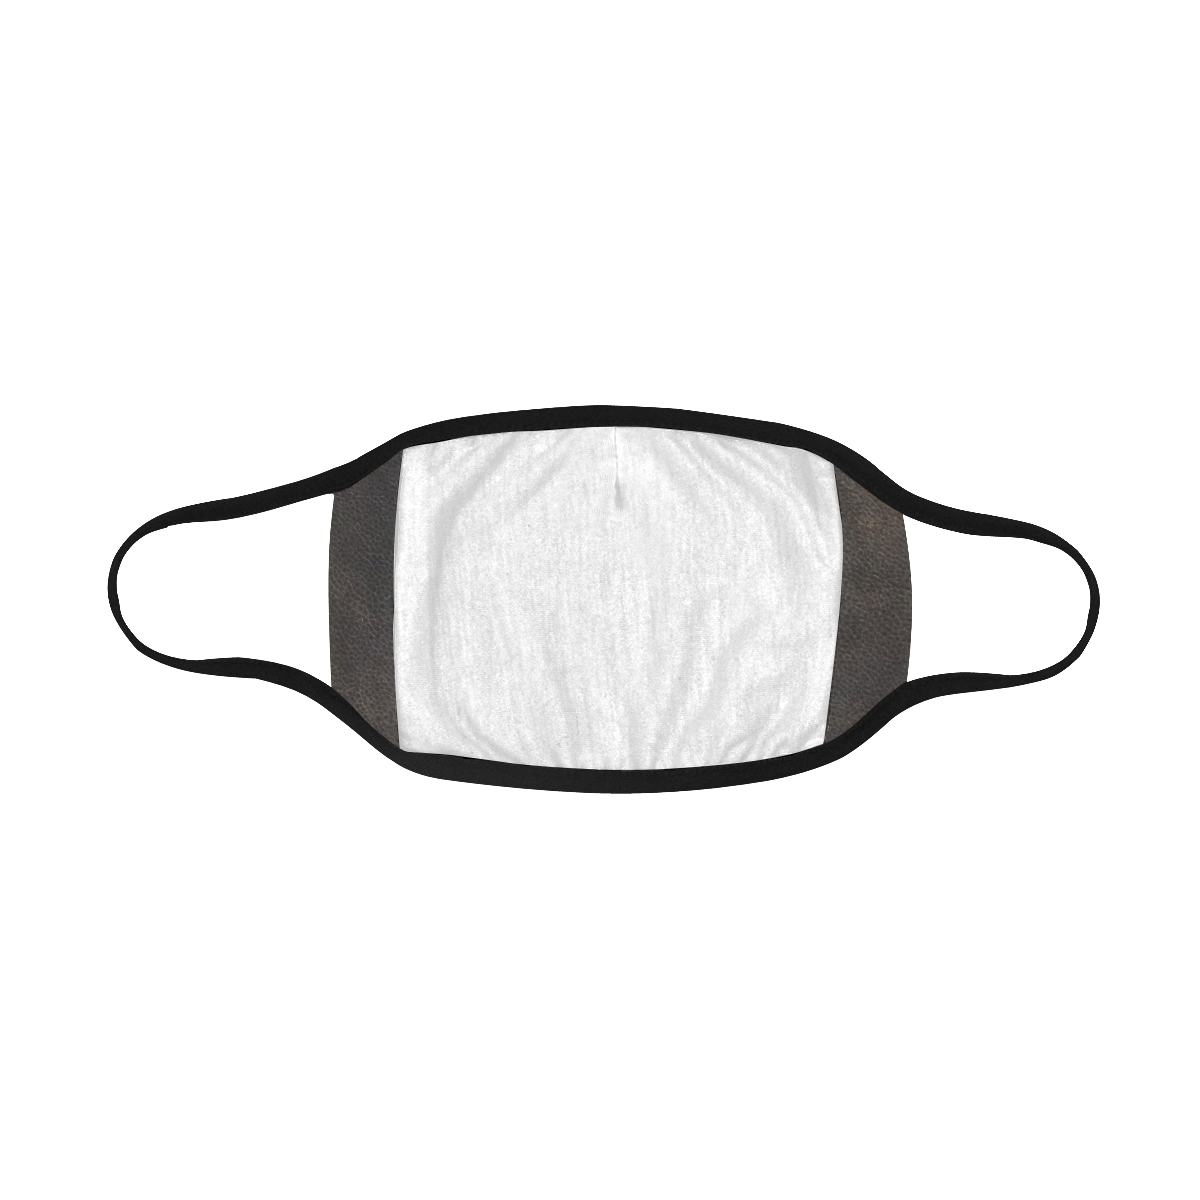 LEATHER 2 Mouth Mask